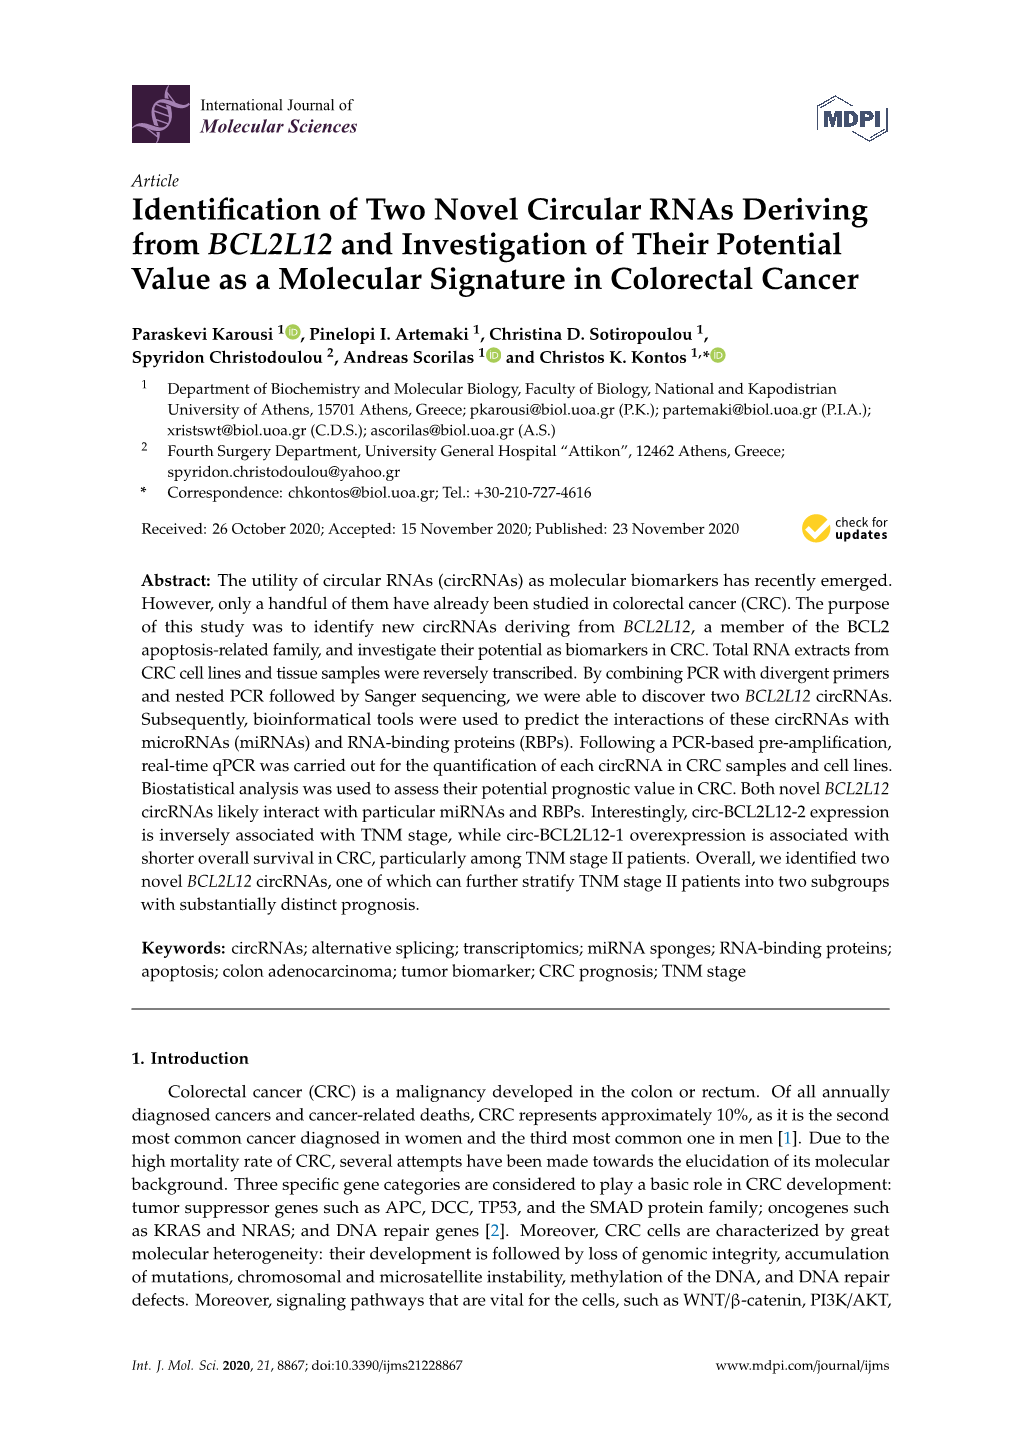 Identification of Two Novel Circular Rnas Deriving from BCL2L12 And